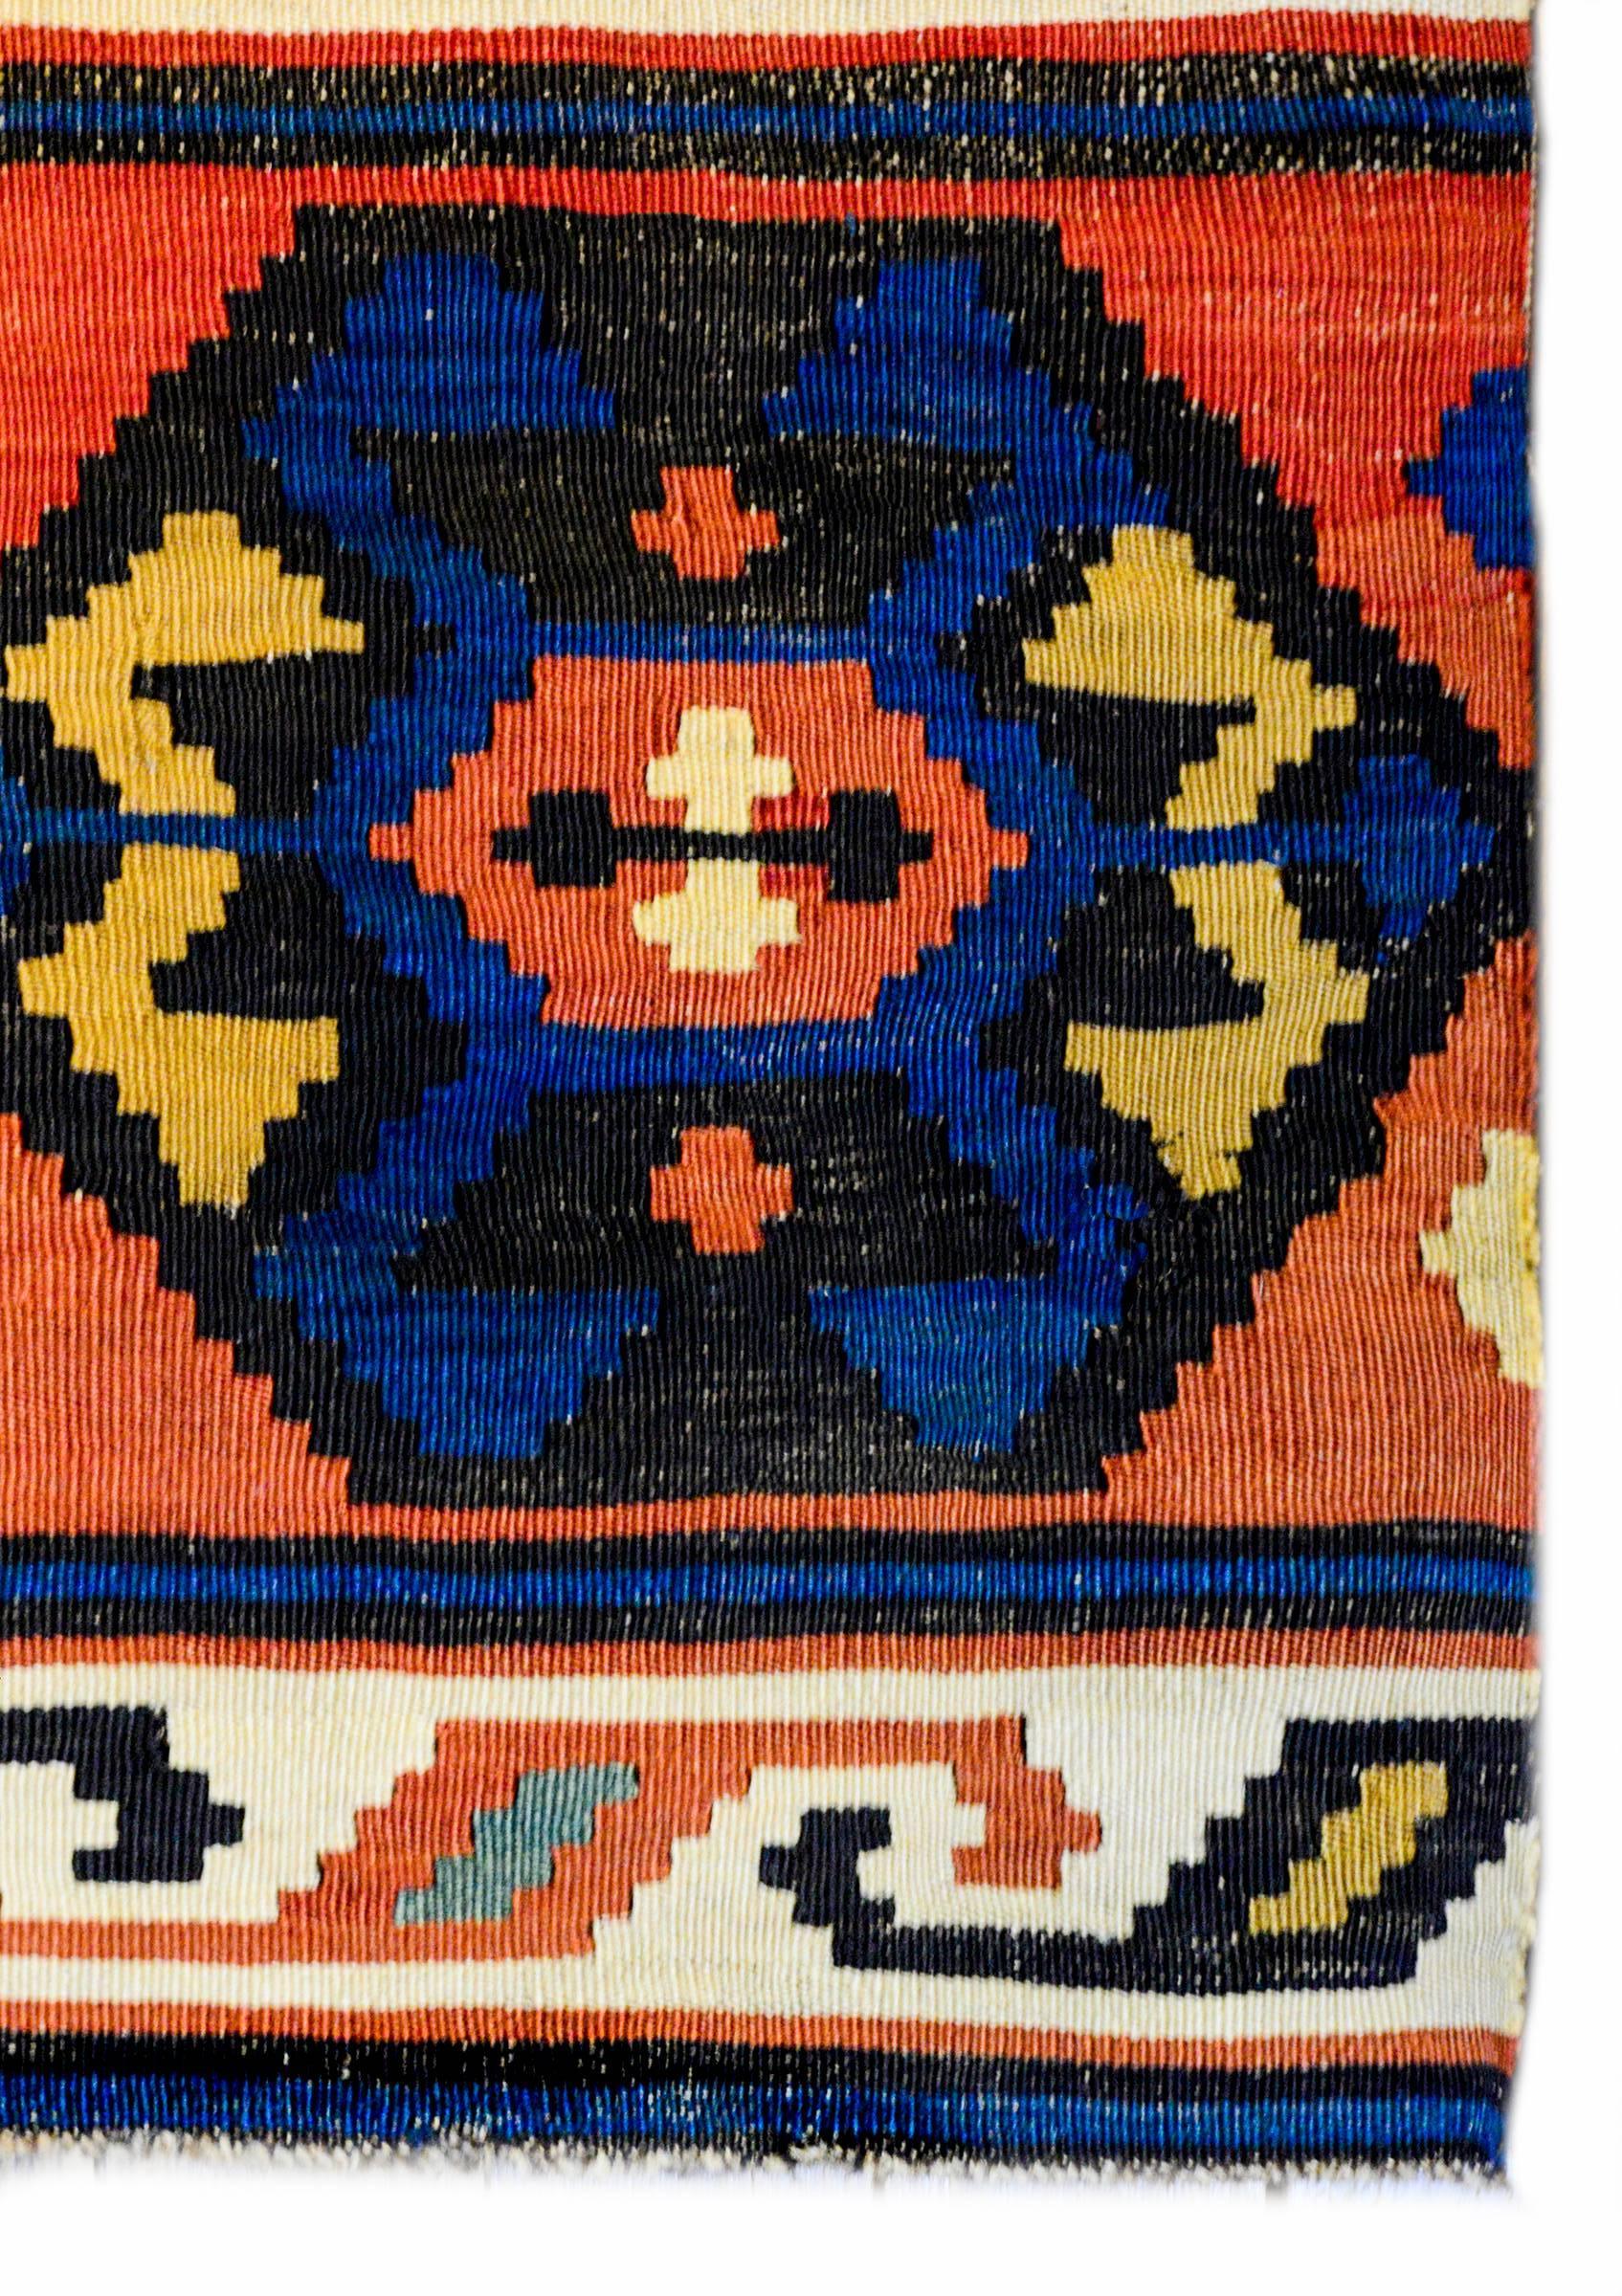 Vegetable Dyed Exciting Mid-20th Century Shriven Kilim Rug For Sale